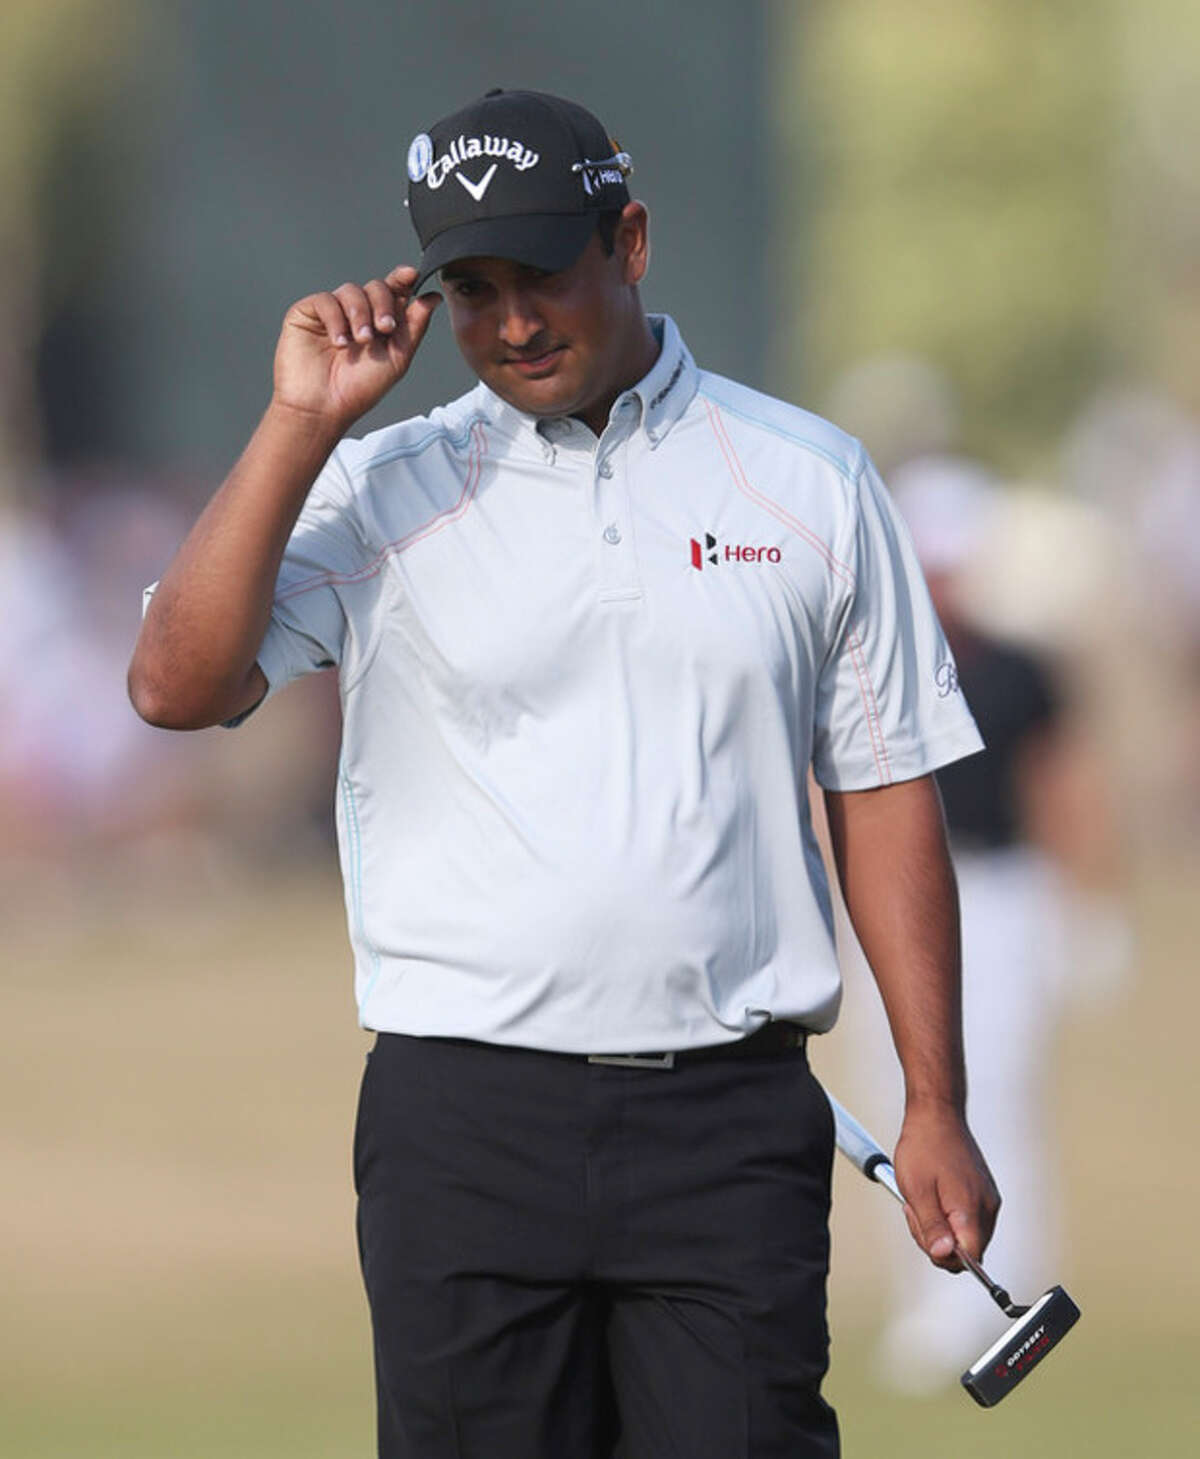 Shiv Kapur of India reacts after putting on the 9th green during the first round of the British Open Golf Championship at Muirfield, Scotland, Thursday July 18, 2013. (AP Photo/Scott Heppell)